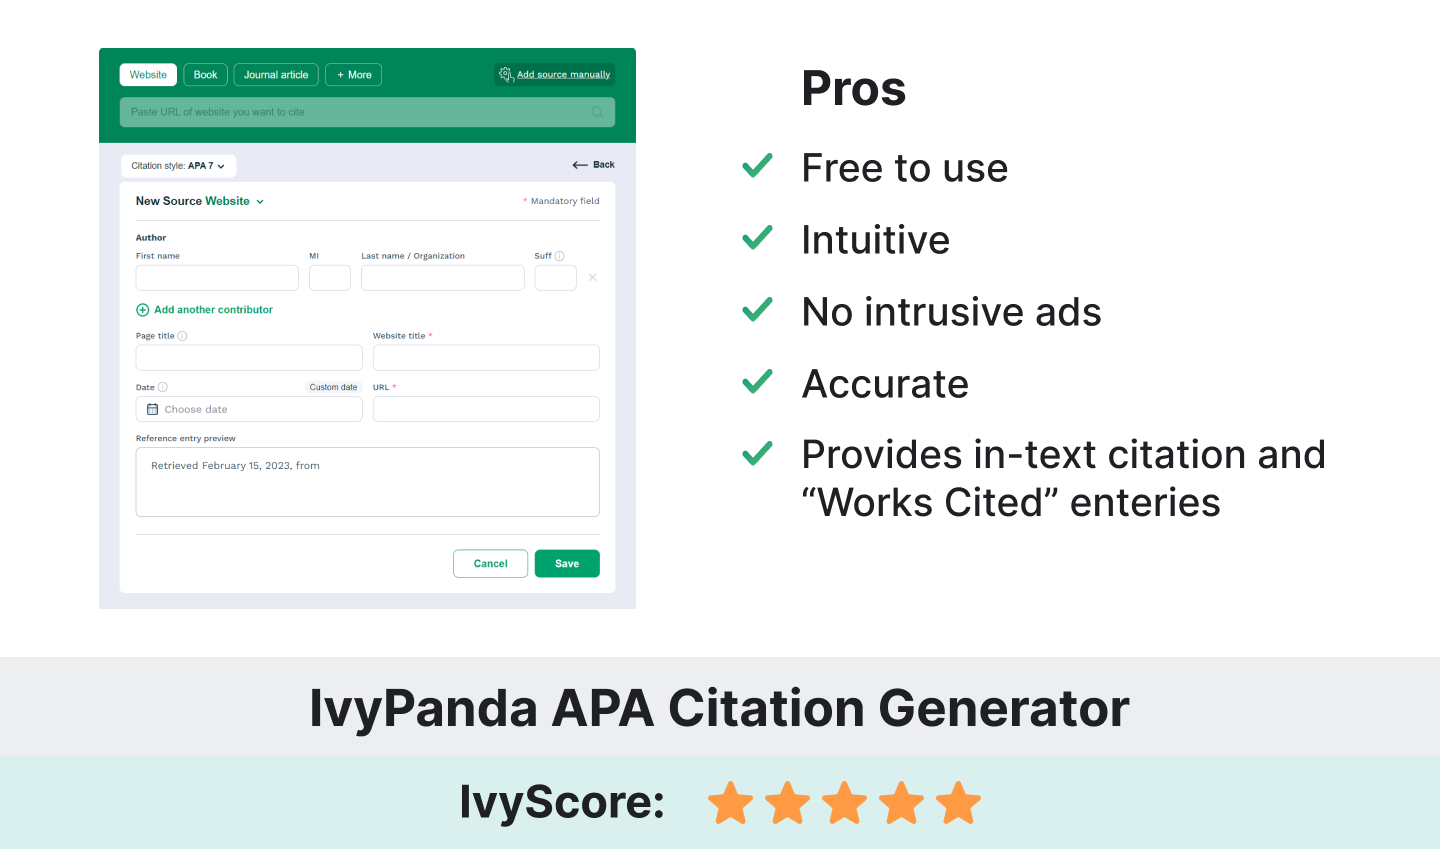 The picture illustrates the key features of the APA citation generator by IvyPanda.